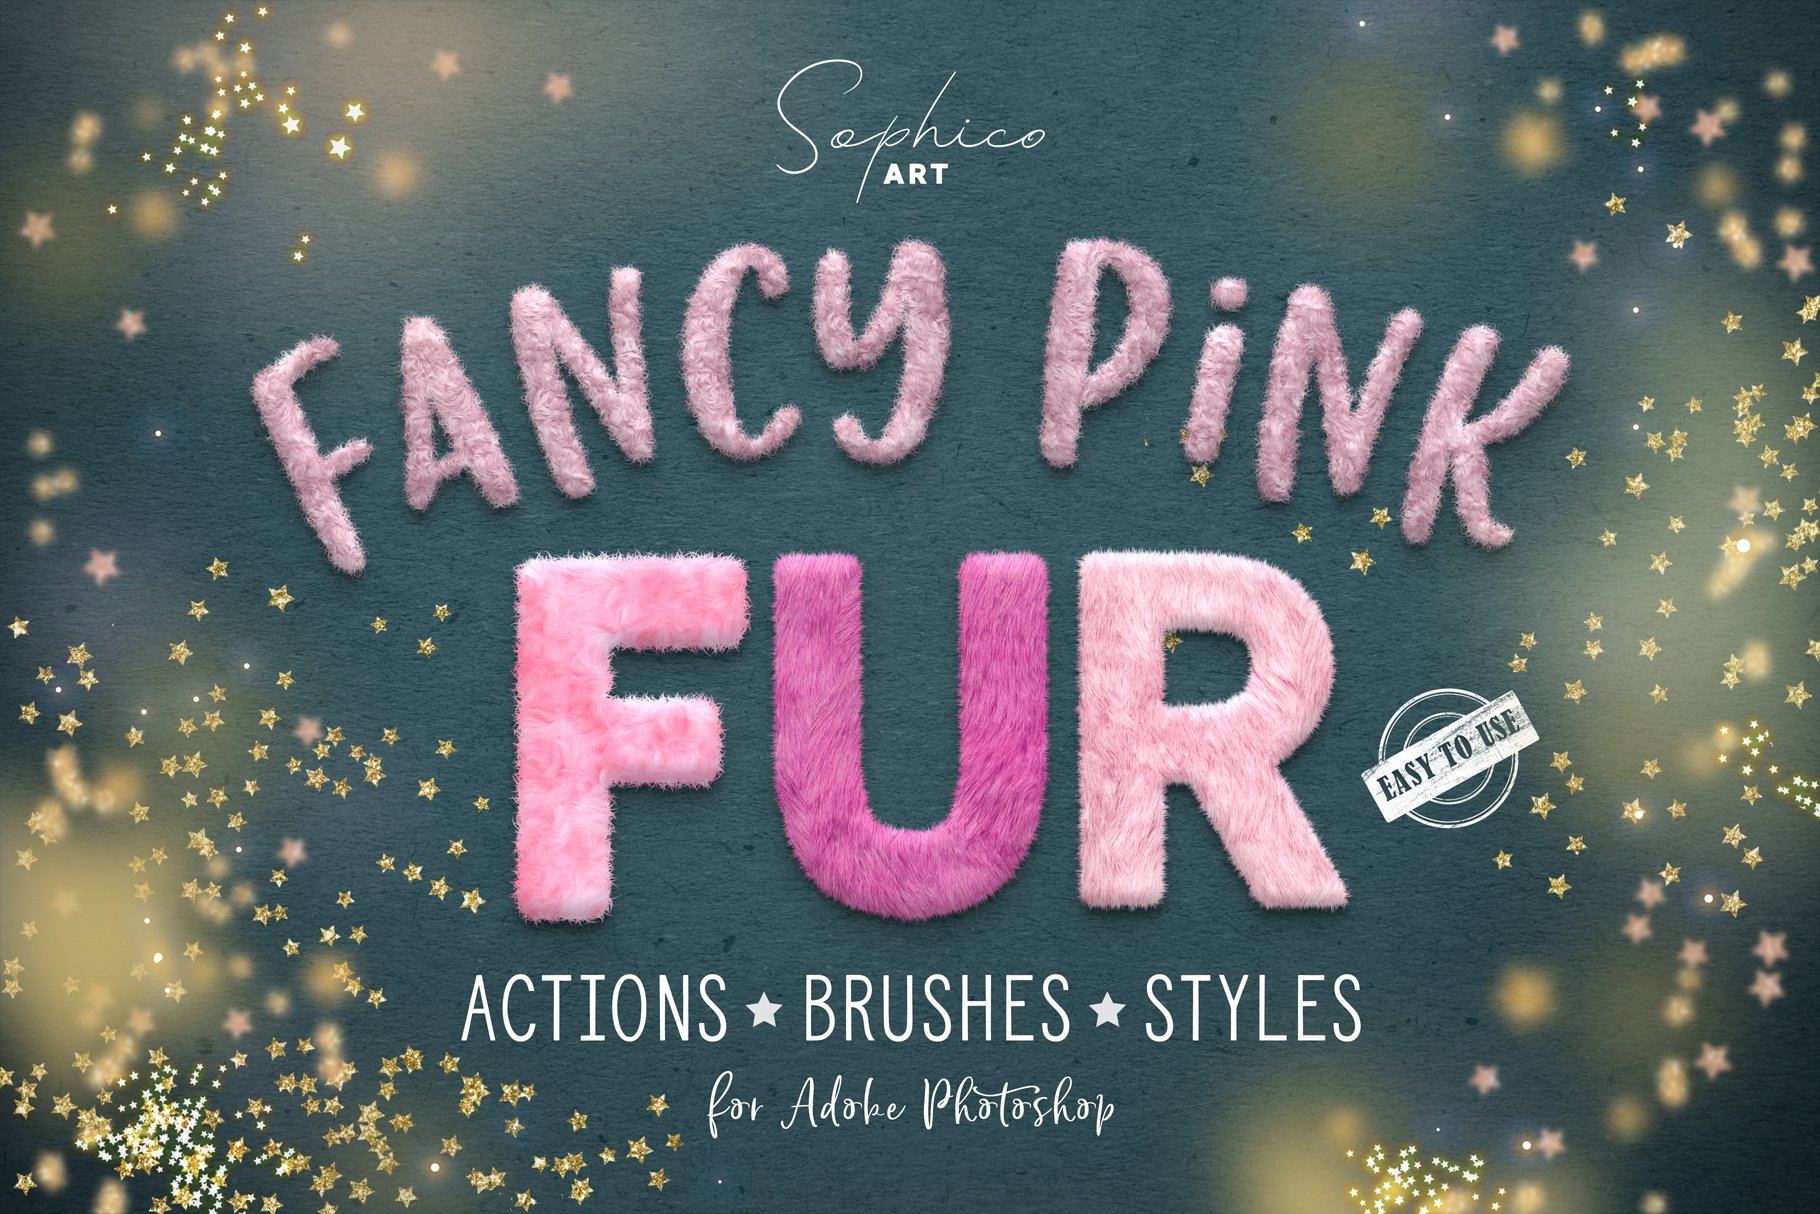 Fanсy Pink Fur Photoshop Effectcover image.